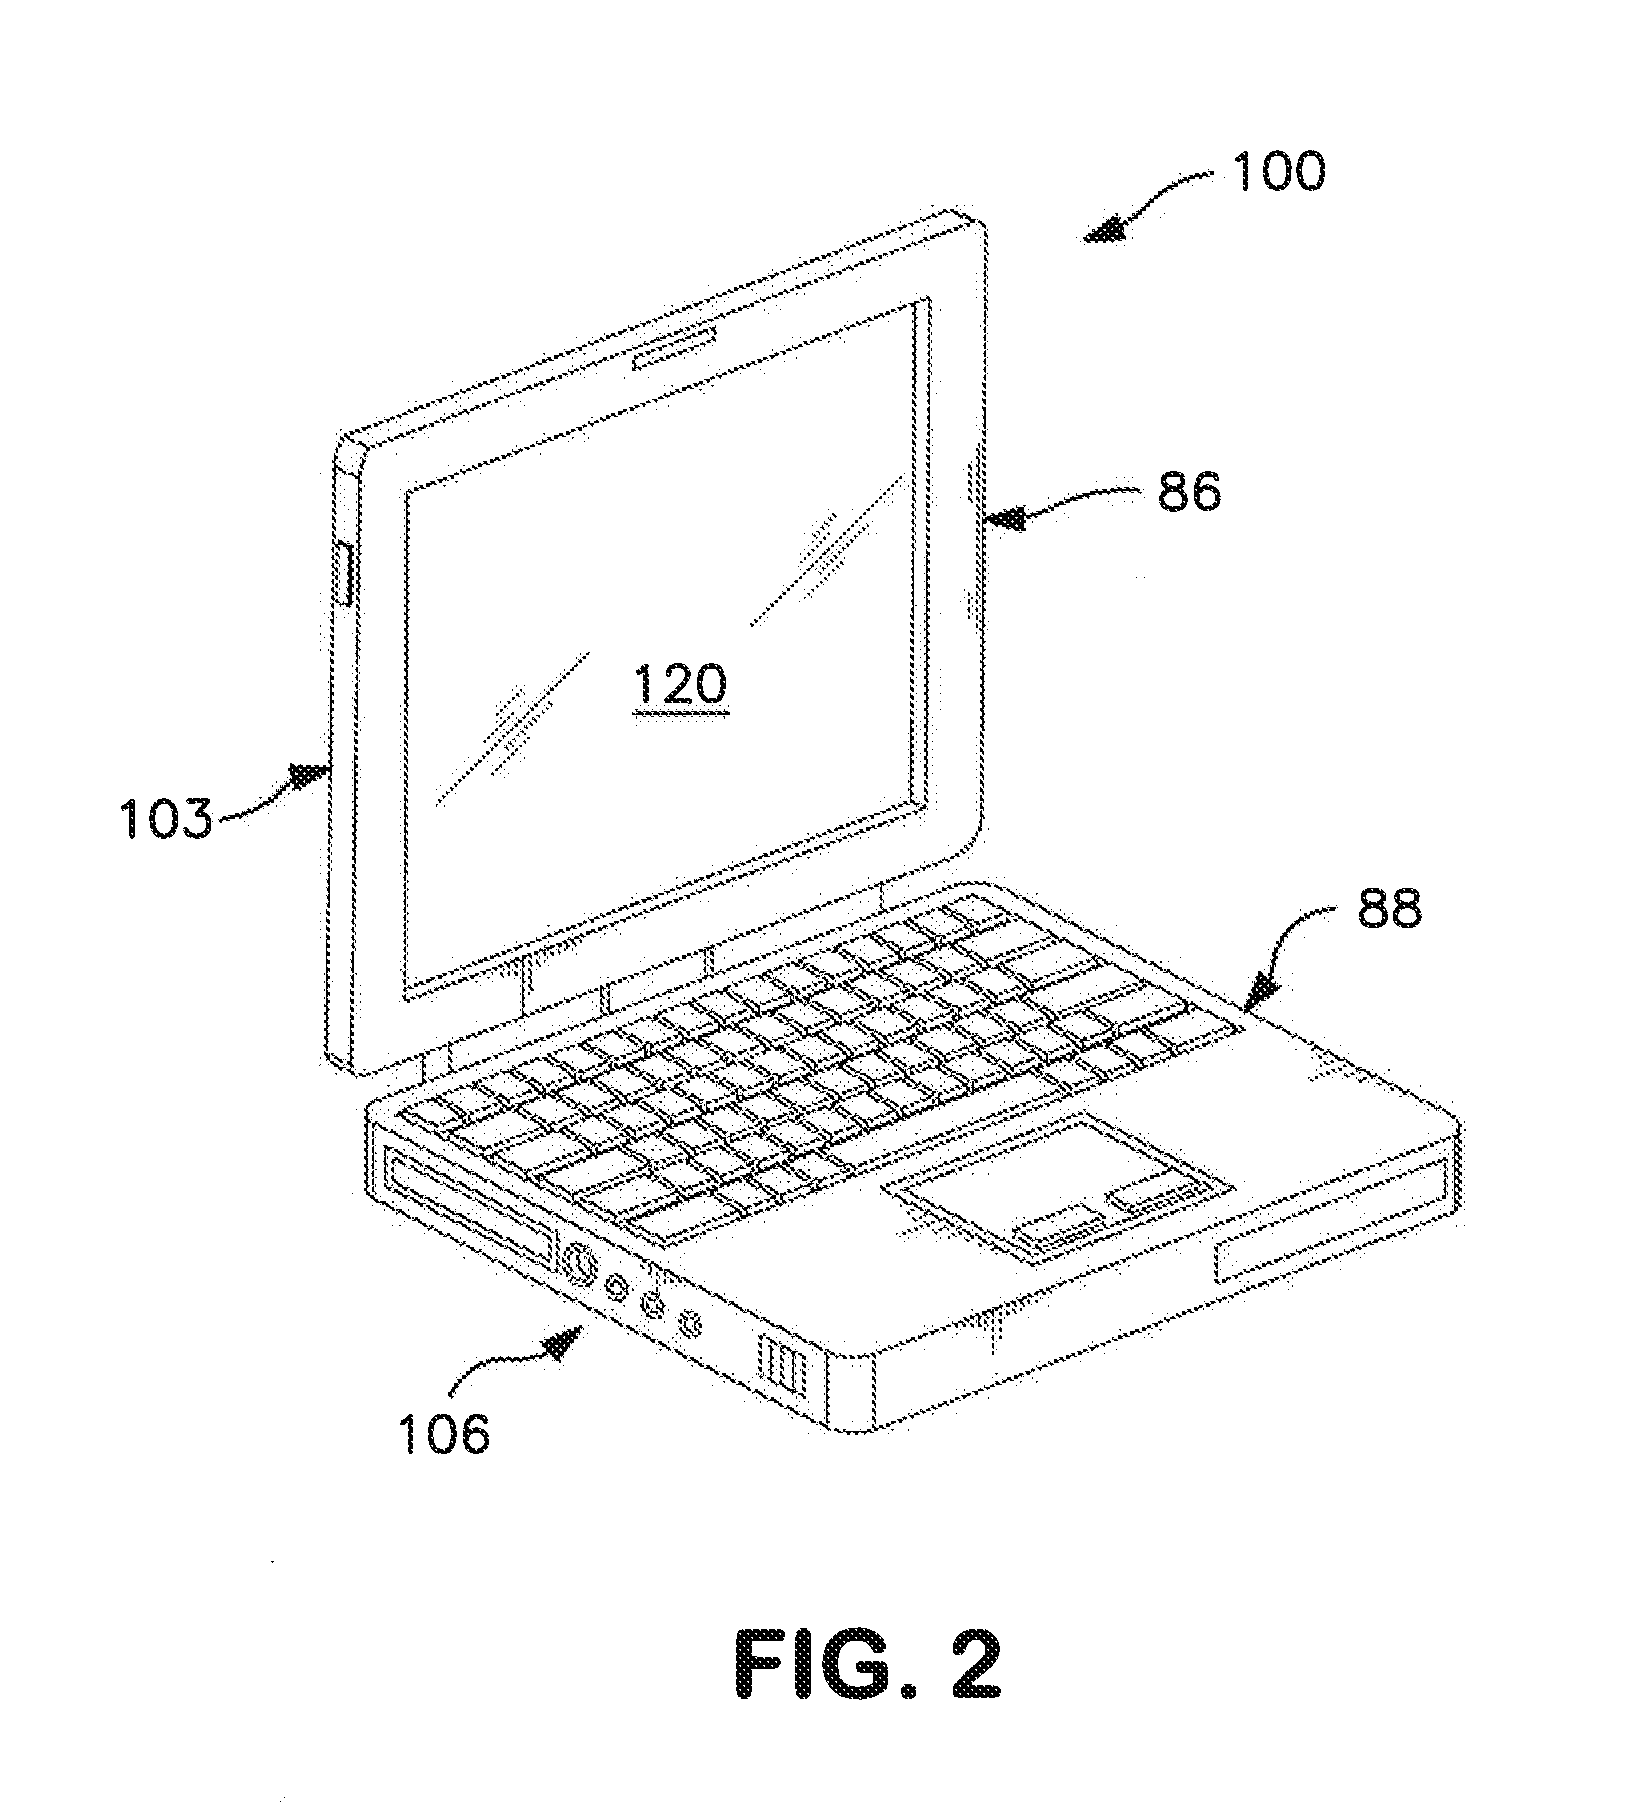 Molded Part for Use in a Portable Electronic Device